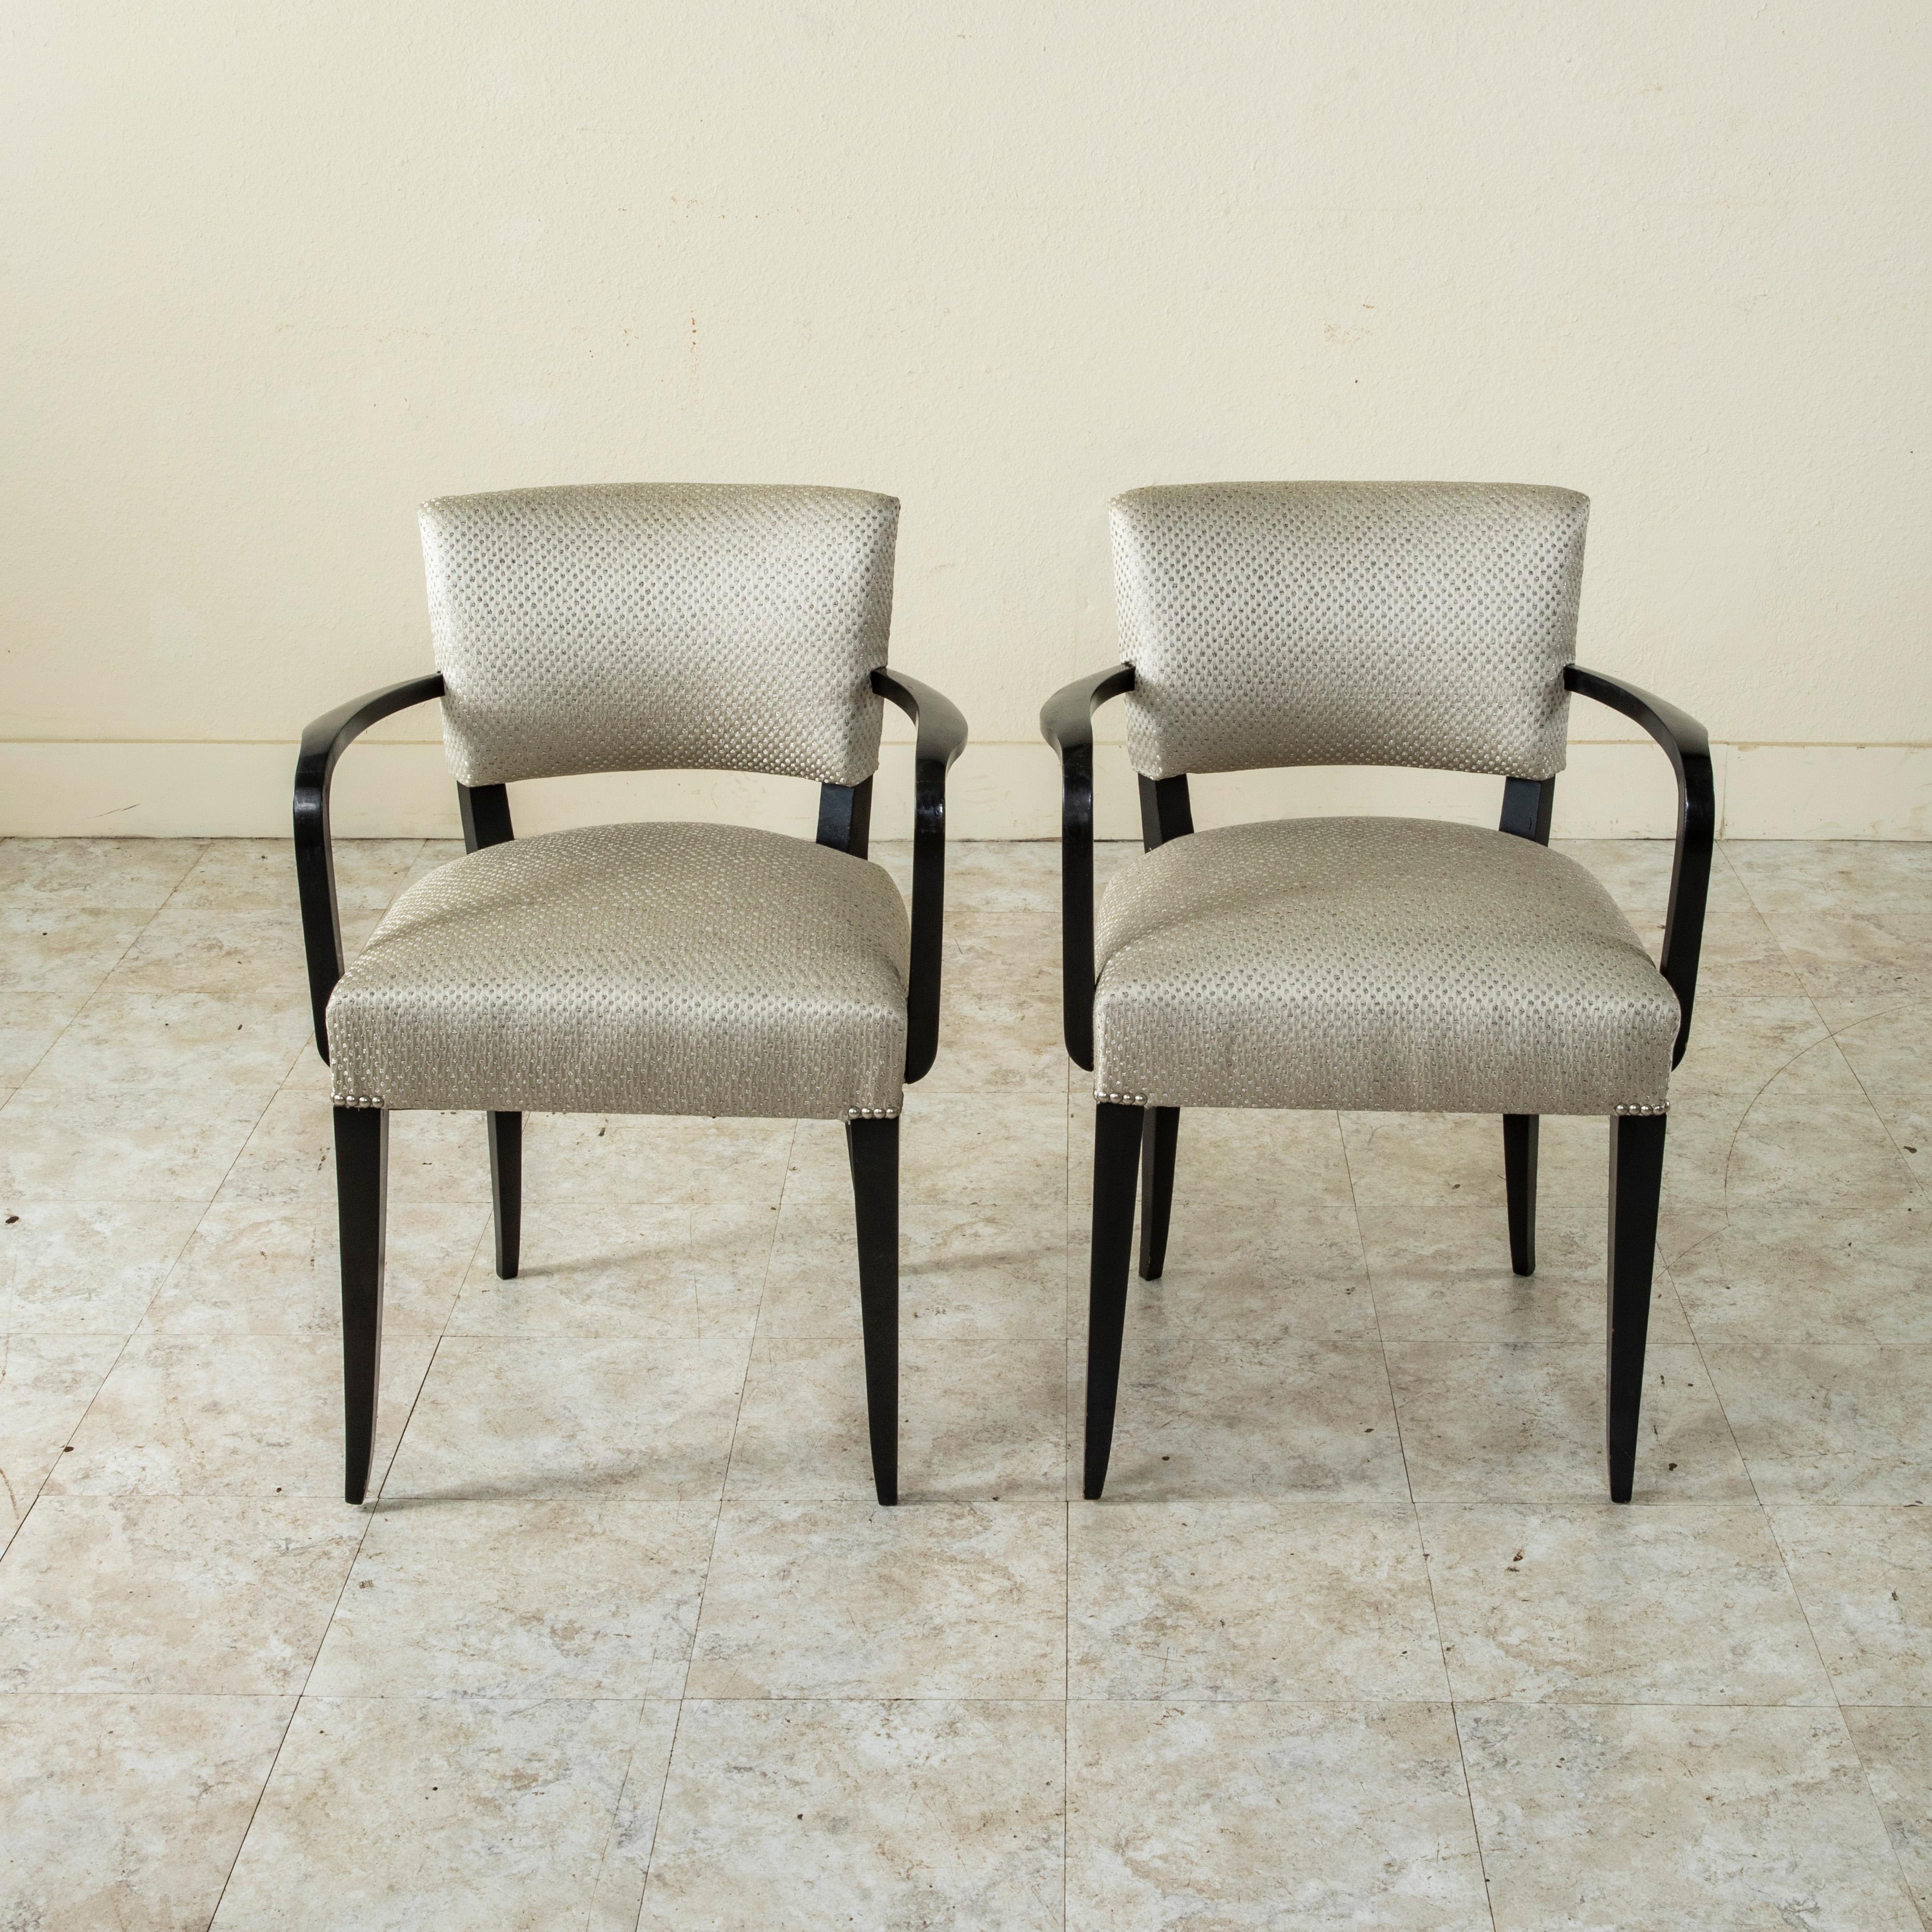 Lacquered Mid-20th Century French Black Lacquer Bridge Chairs with Nail Head Trim For Sale